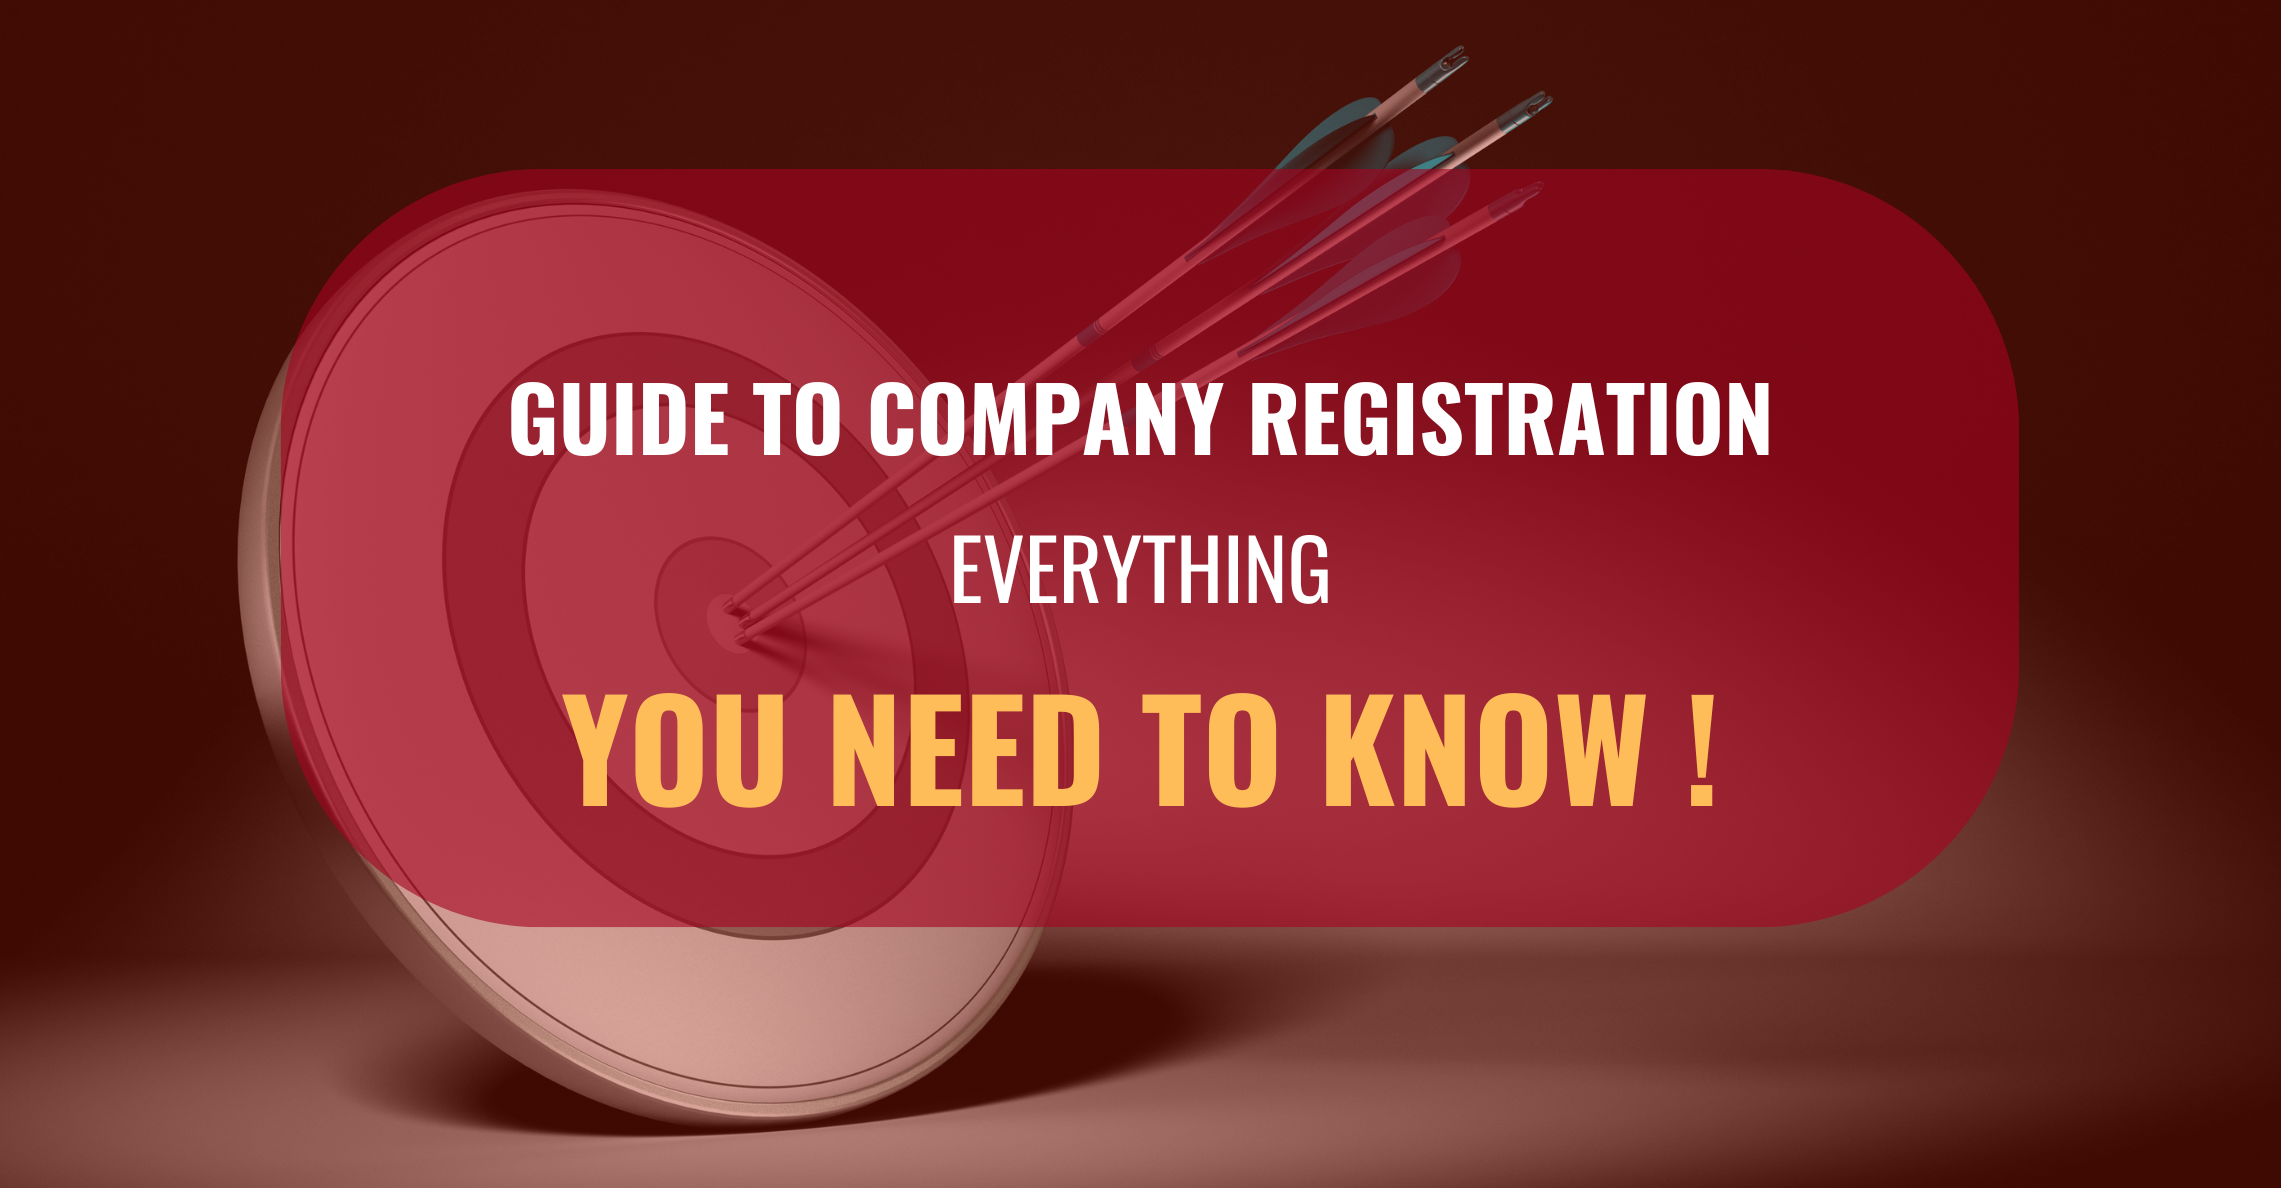 Guide to Company Registration: Everything You Need to Know